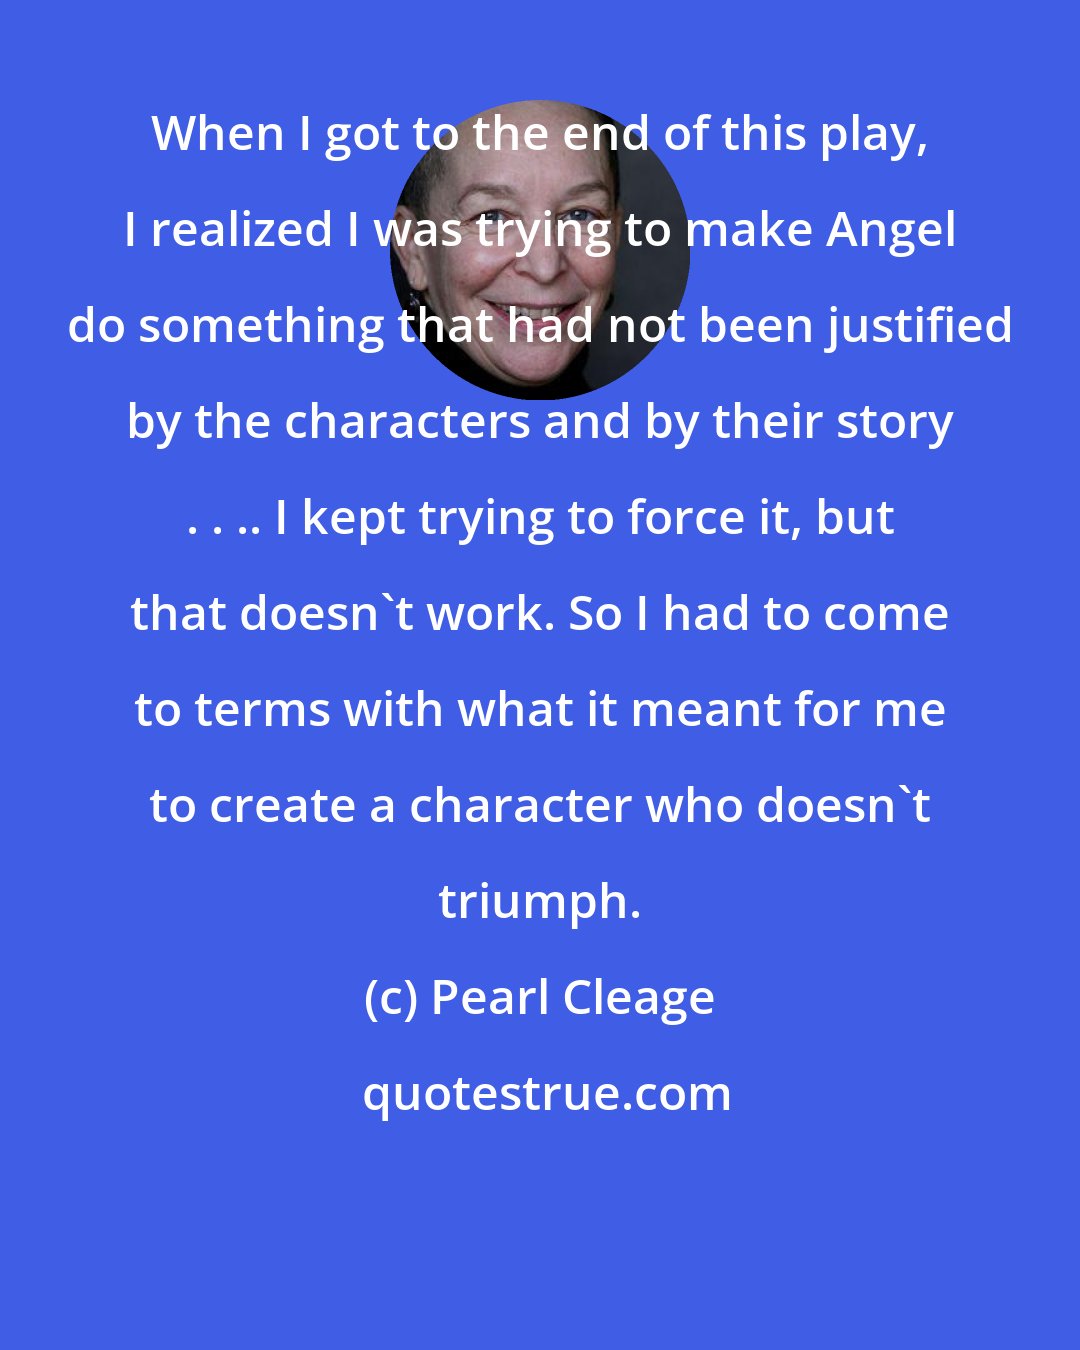 Pearl Cleage: When I got to the end of this play, I realized I was trying to make Angel do something that had not been justified by the characters and by their story . . .. I kept trying to force it, but that doesn't work. So I had to come to terms with what it meant for me to create a character who doesn't triumph.